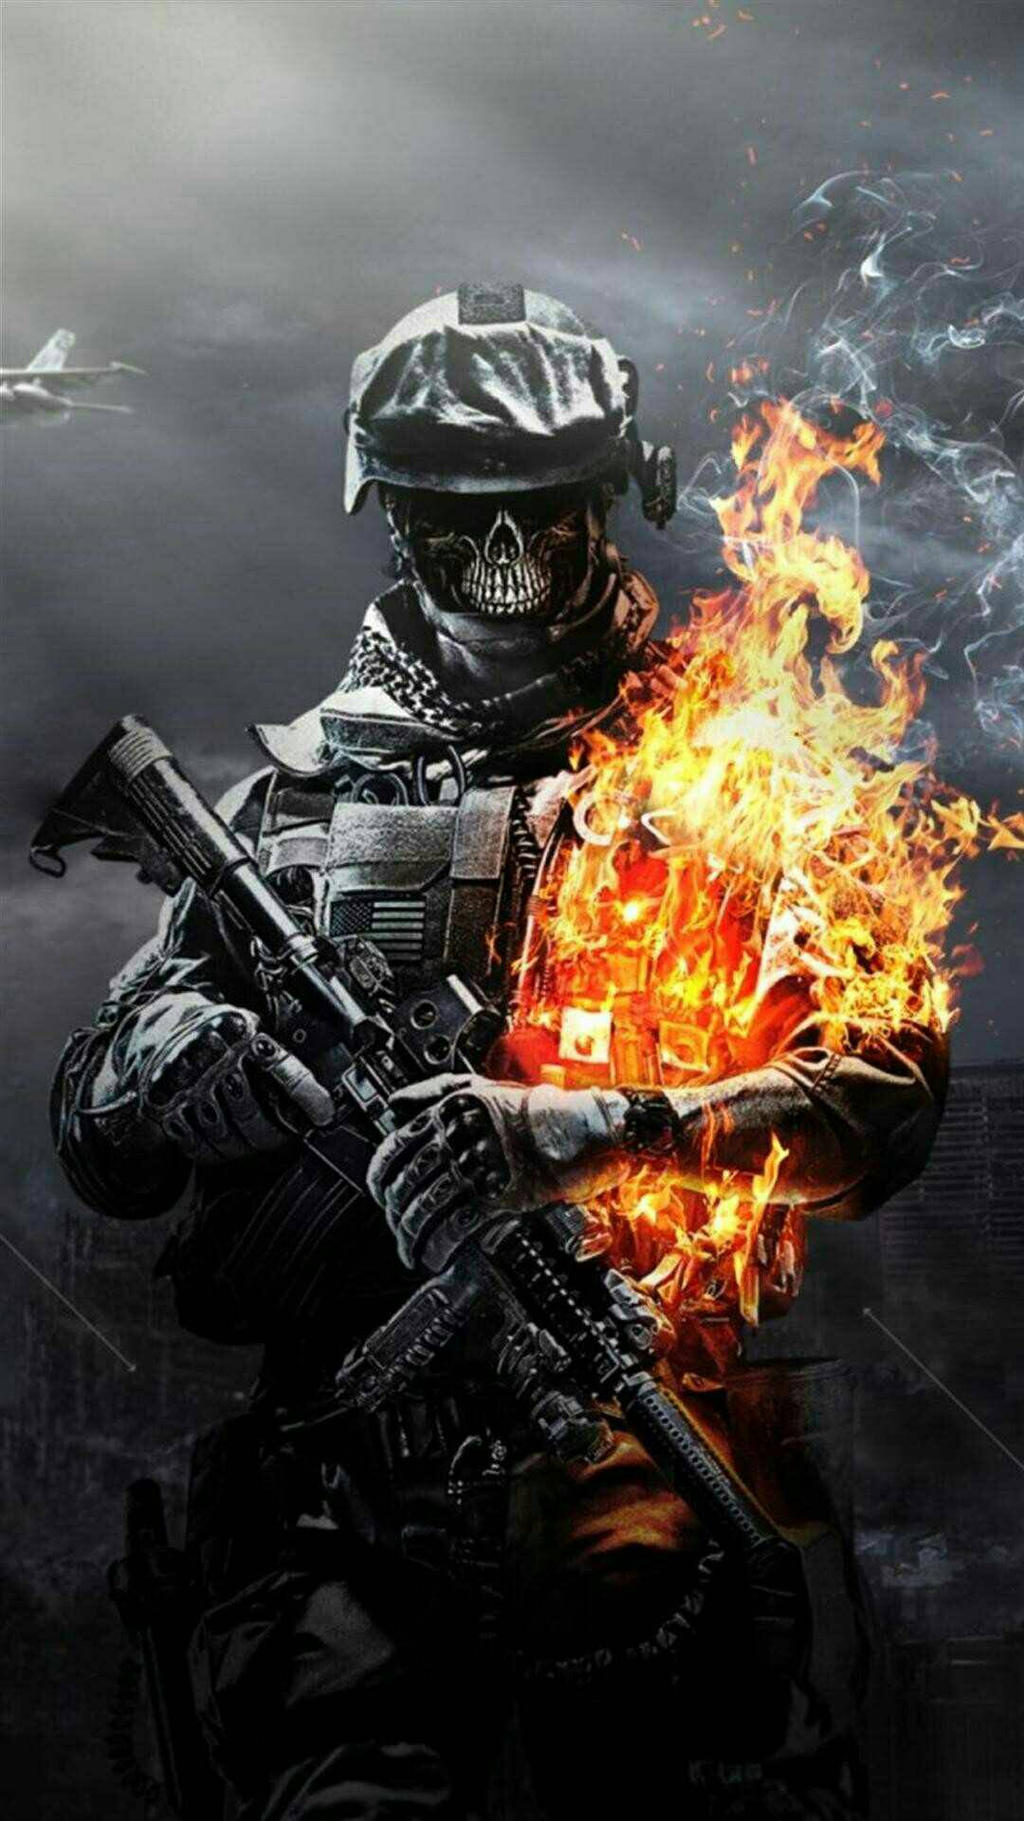 CALL OF DUTY wallpaper for mobile by LORD12DARK on DeviantArt